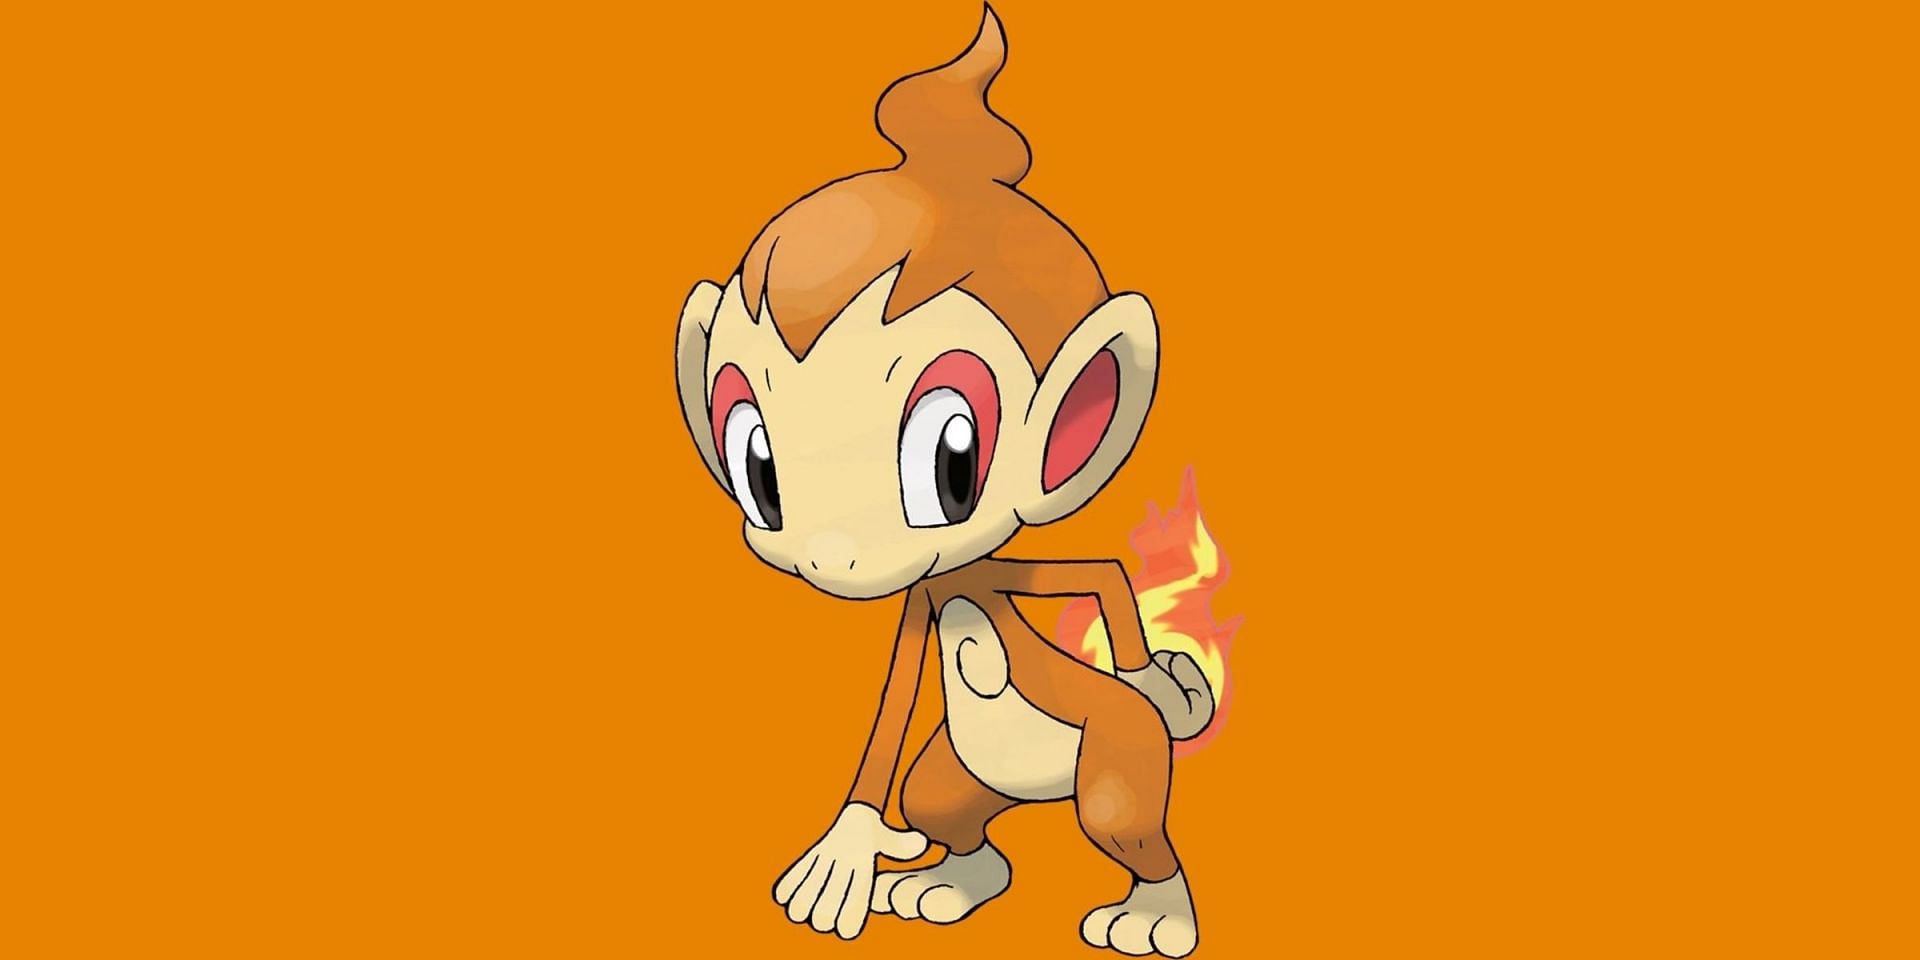 Chimchar is getting a lot of attention in Pokemon GO this November (Image via Niantic)